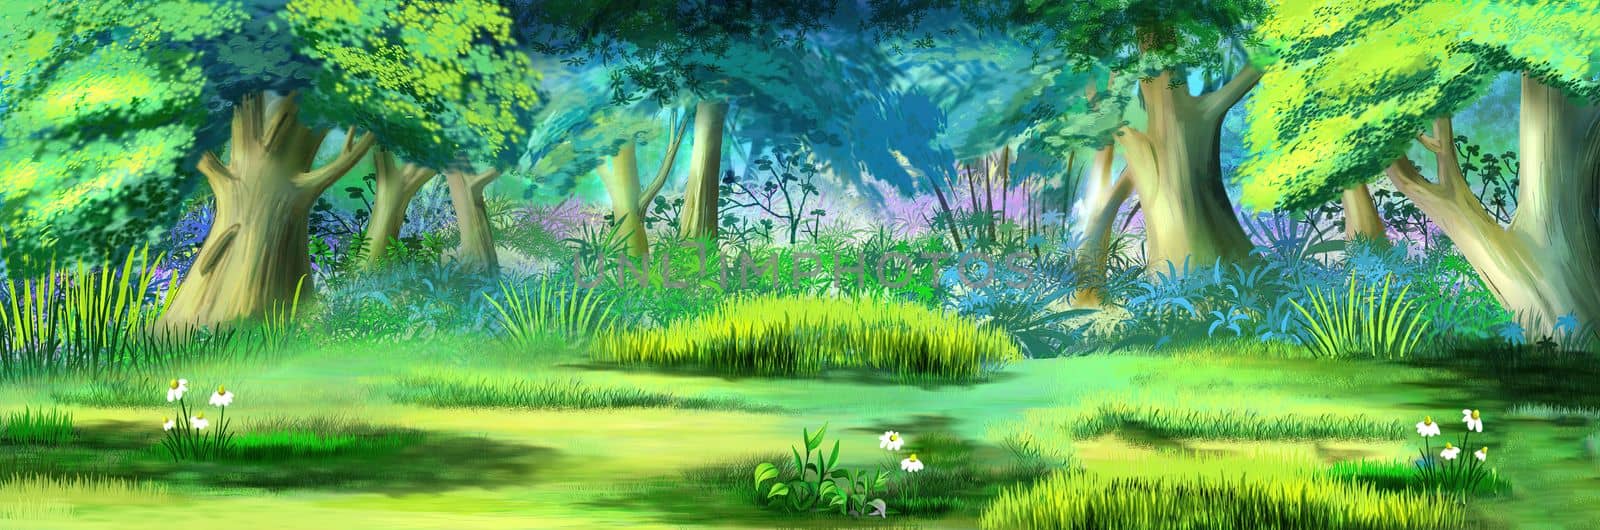 Deciduous forest in summer illustration by Multipedia